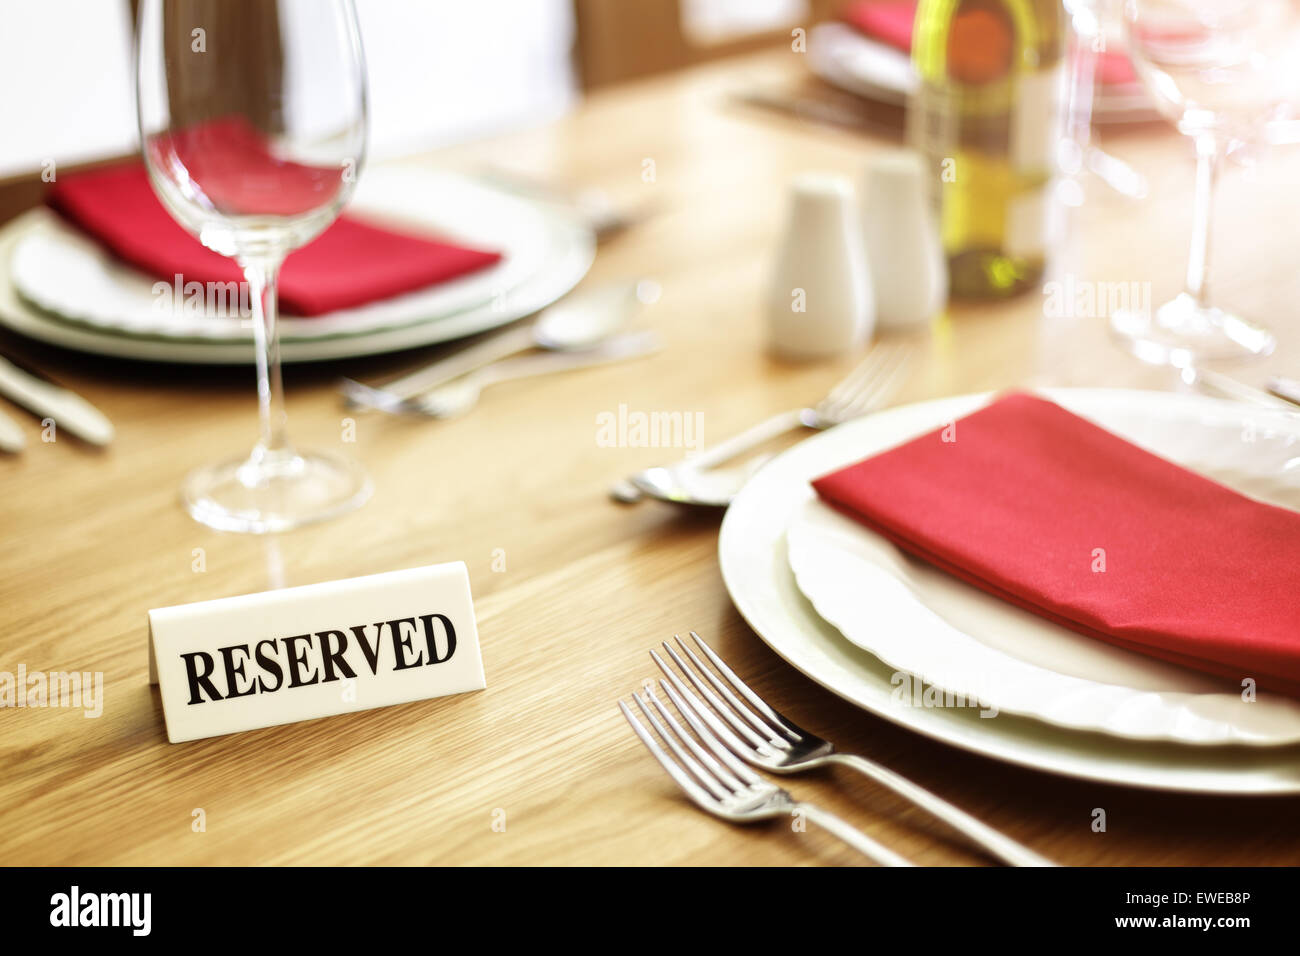 Restaurant reserved table sign Stock Photo